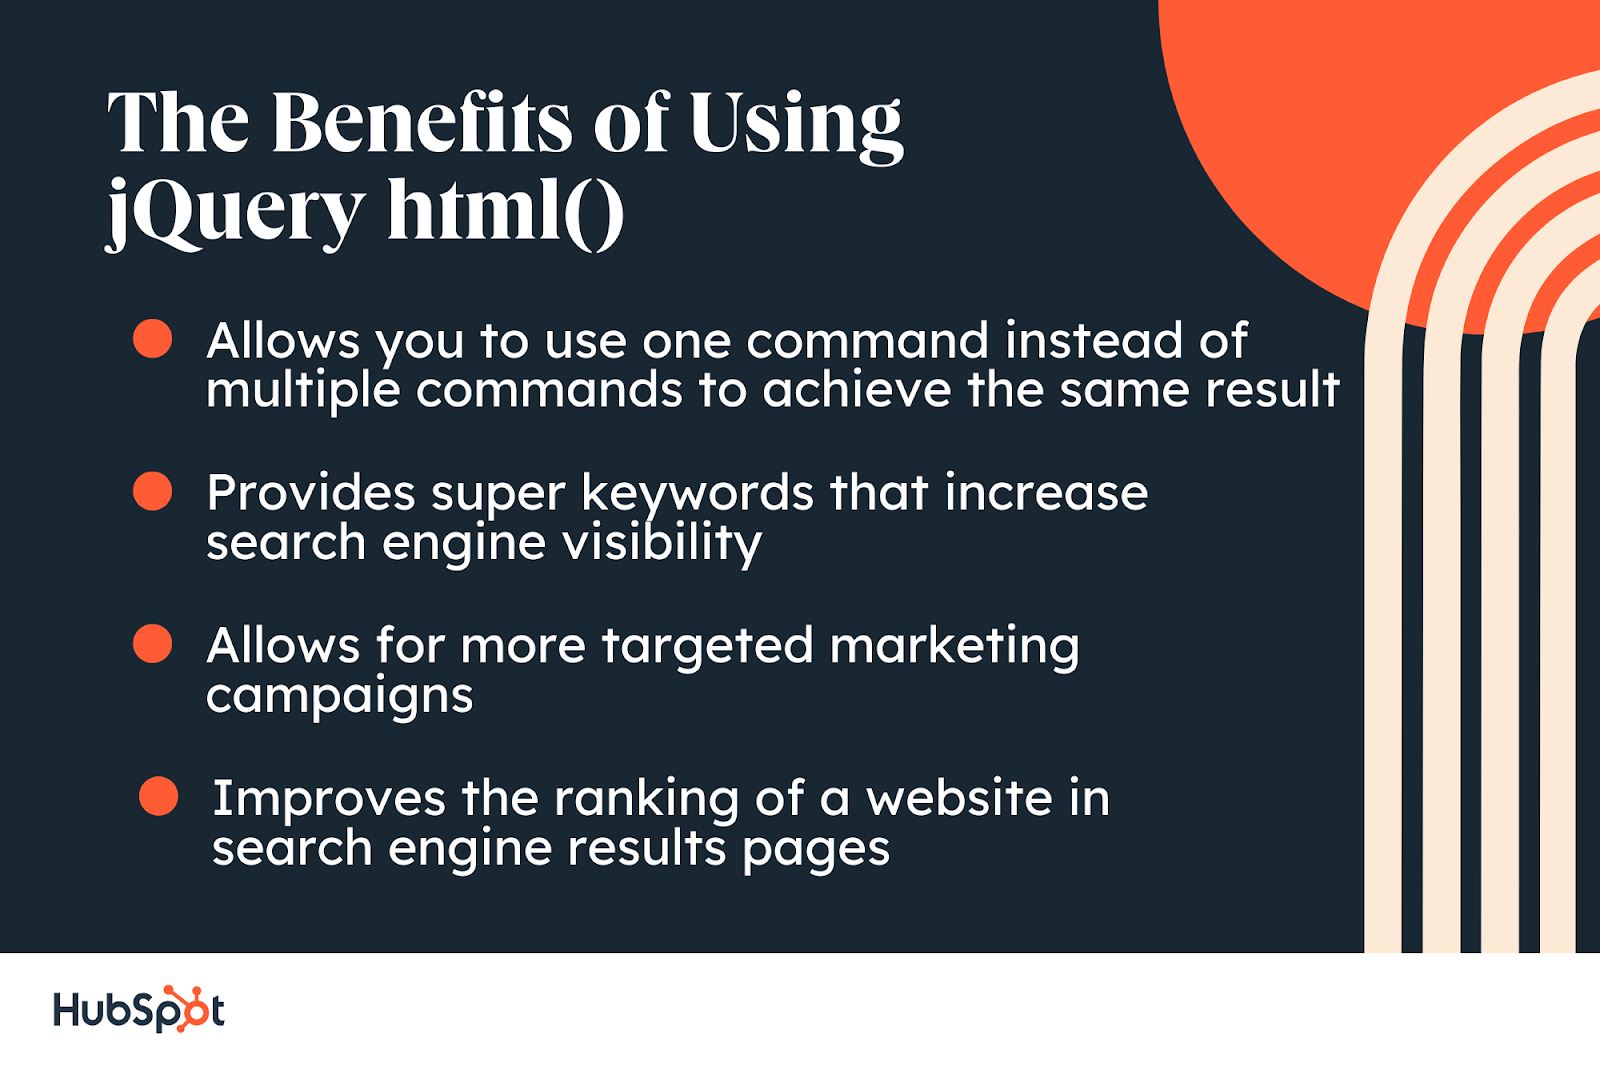 jquery html method benefits, The Benefits of Using jQuery html(). Allows you to use one command instead of multiple commands to achieve the same result. Provides super keywords that increase search engine visibility. Allows for more targeted marketing campaigns. Improves the ranking of a website in search engine results pages.